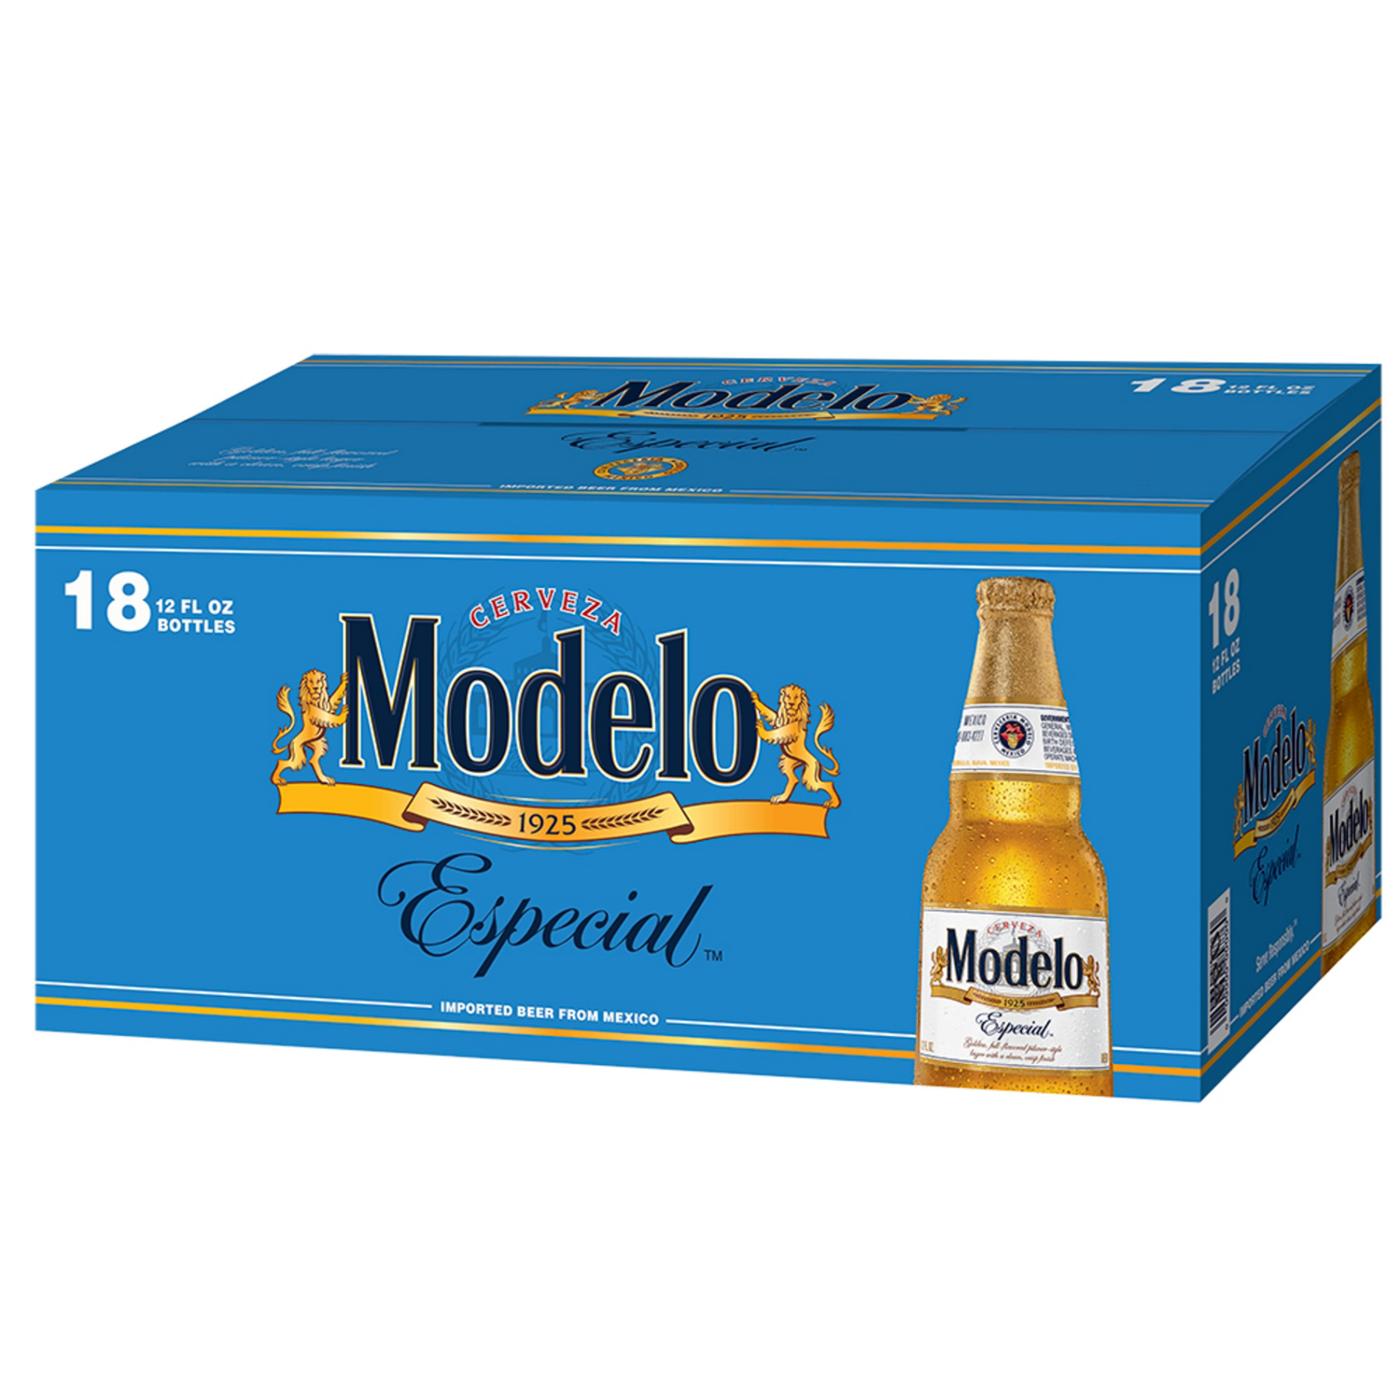 Modelo Especial Mexican Lager Import Beer 12 oz Bottles, 18 pk; image 2 of 11